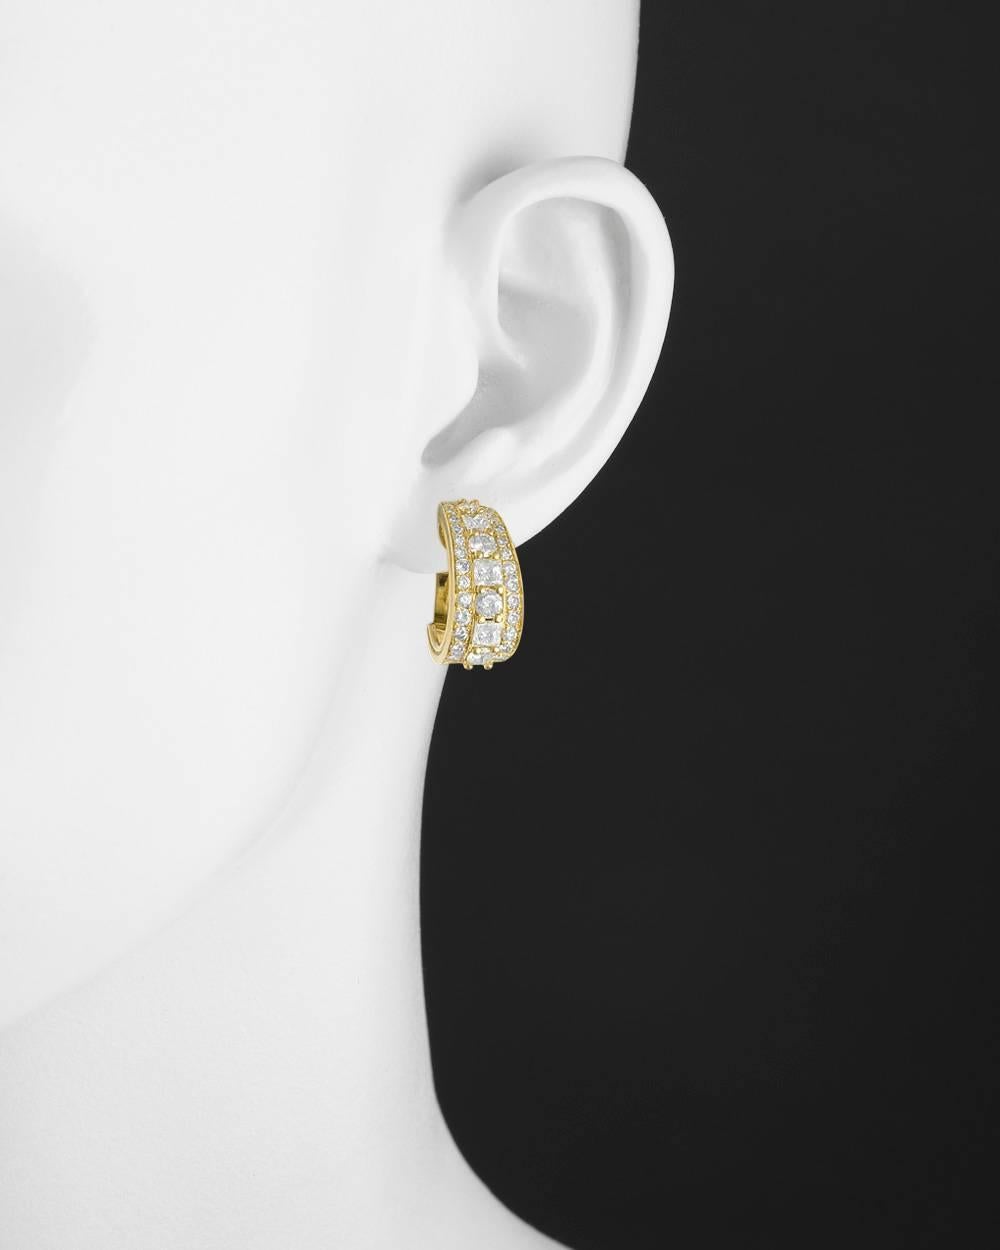 Curved and tapered half-hoop earclips, centering a larger row of alternating princess-cut and round brilliant-cut diamonds, flanked by a smaller row of round brilliant-cut diamonds on either side, in 18k yellow gold, numbered 3K37718 and signed